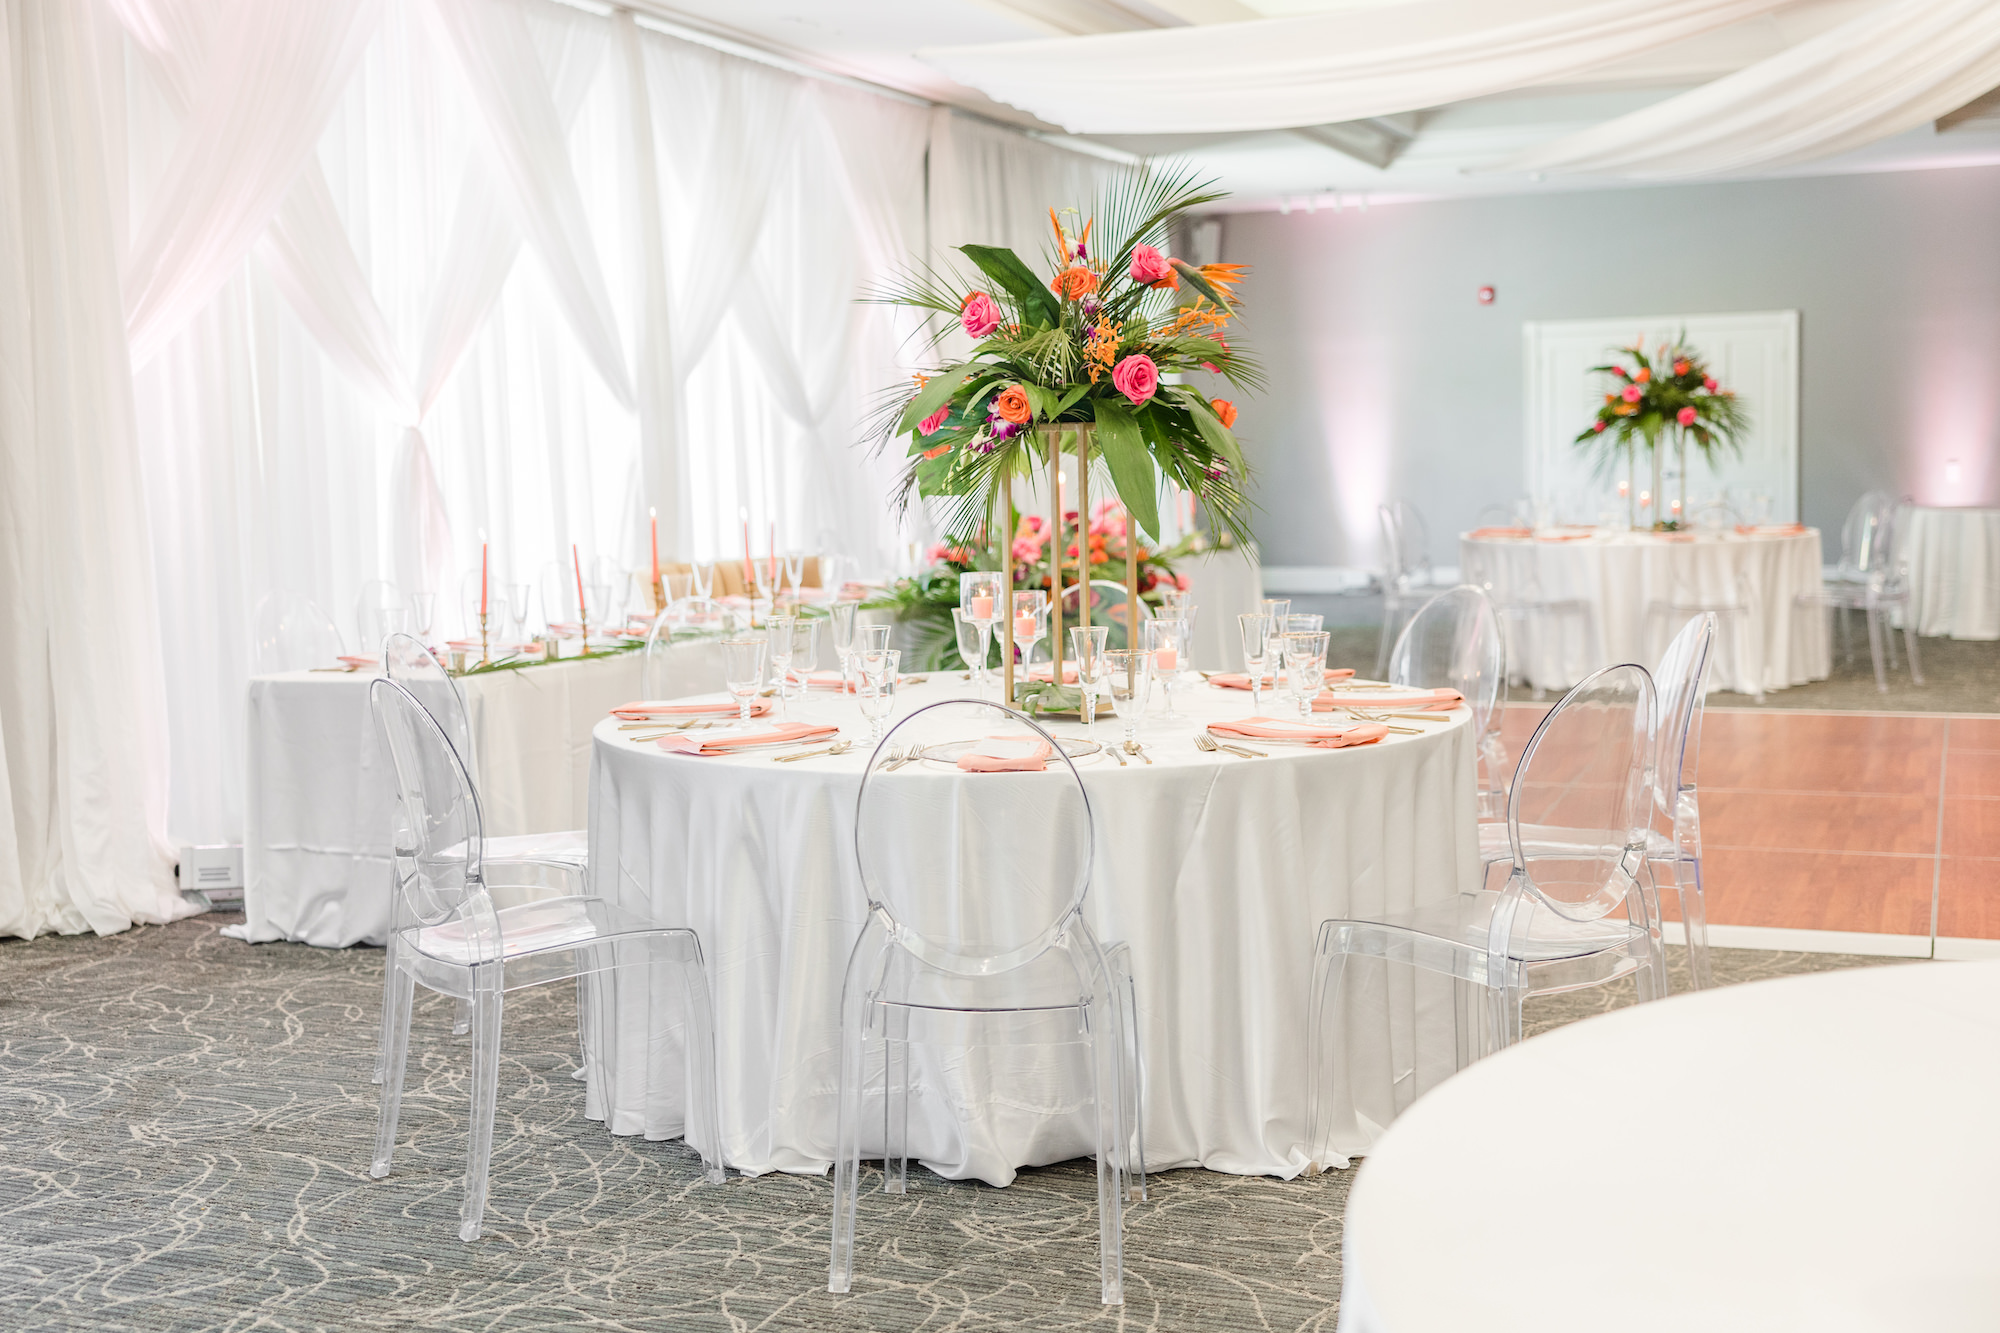 Tropical Pink and Orange Wedding Reception Centerpiece Ideas | Tampa Bay Rentals A Chair Affair | Venue Tampa Palms Golf and Country Club | Florist Save the Date Florida